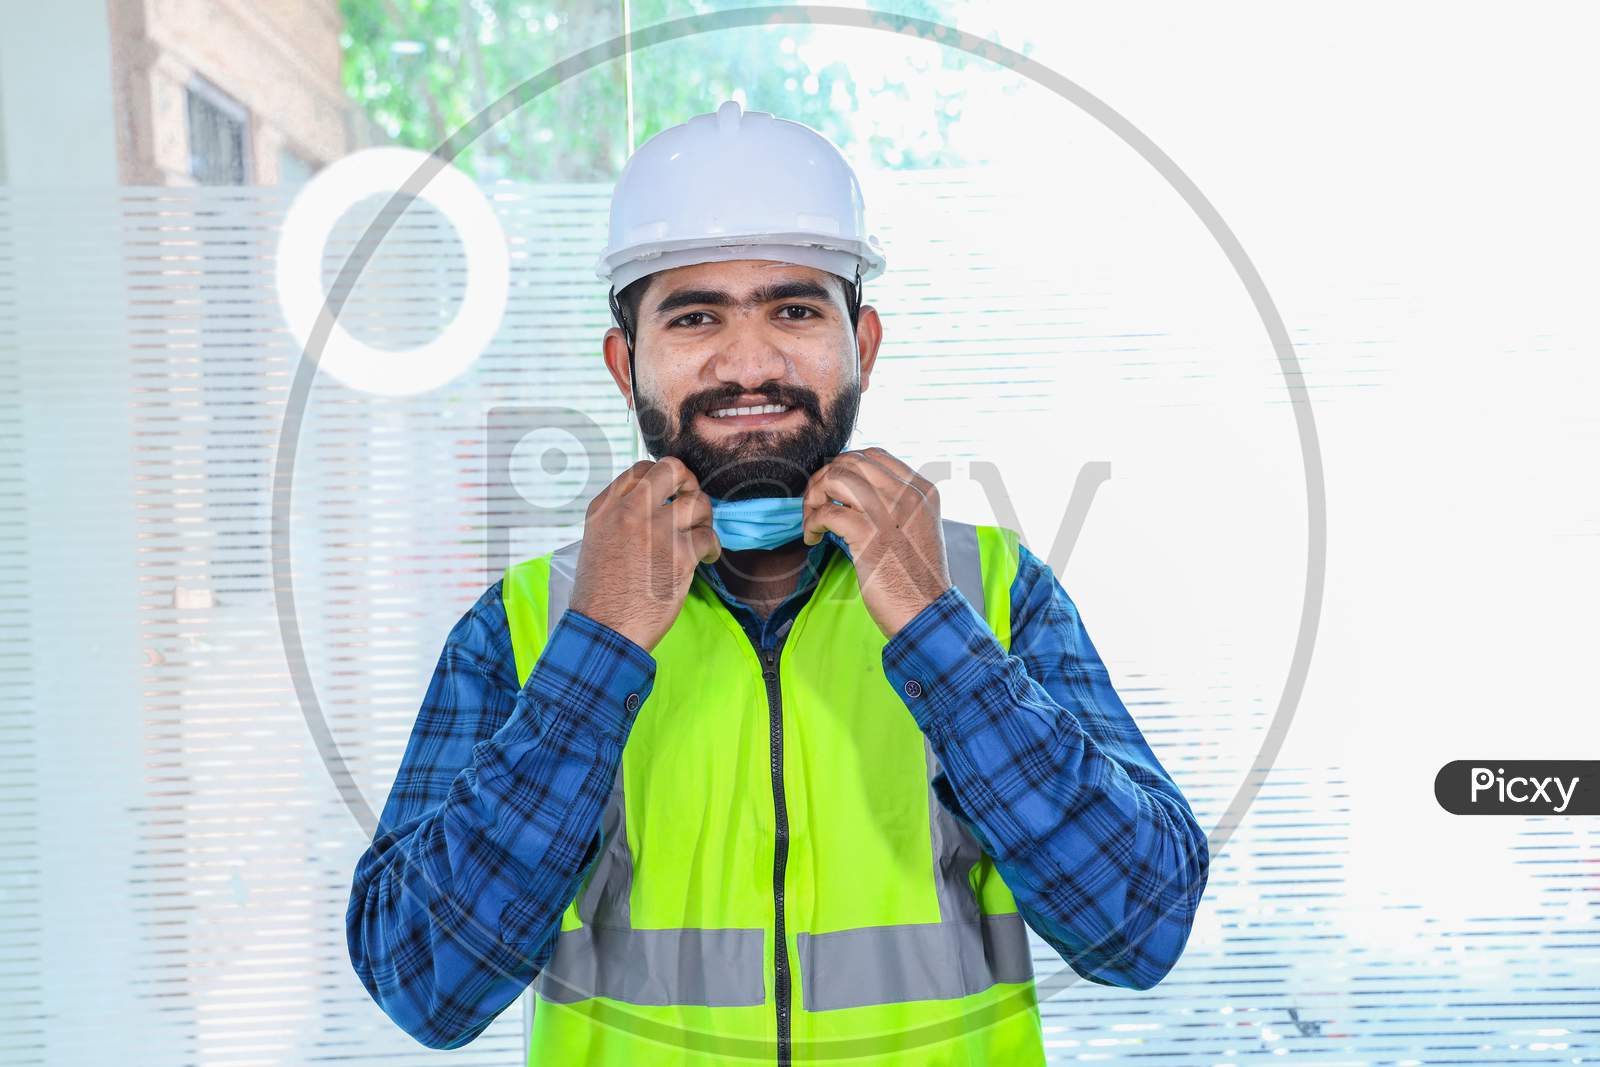 Young Engineer Taking Off Mask Smiling, Closeup Of Beard Man Wearing Blue Shirt With Yellow Vest And White Helmet, Back To Work After Lockdown Ends Due To Covid-19 Pandemic, New Normal